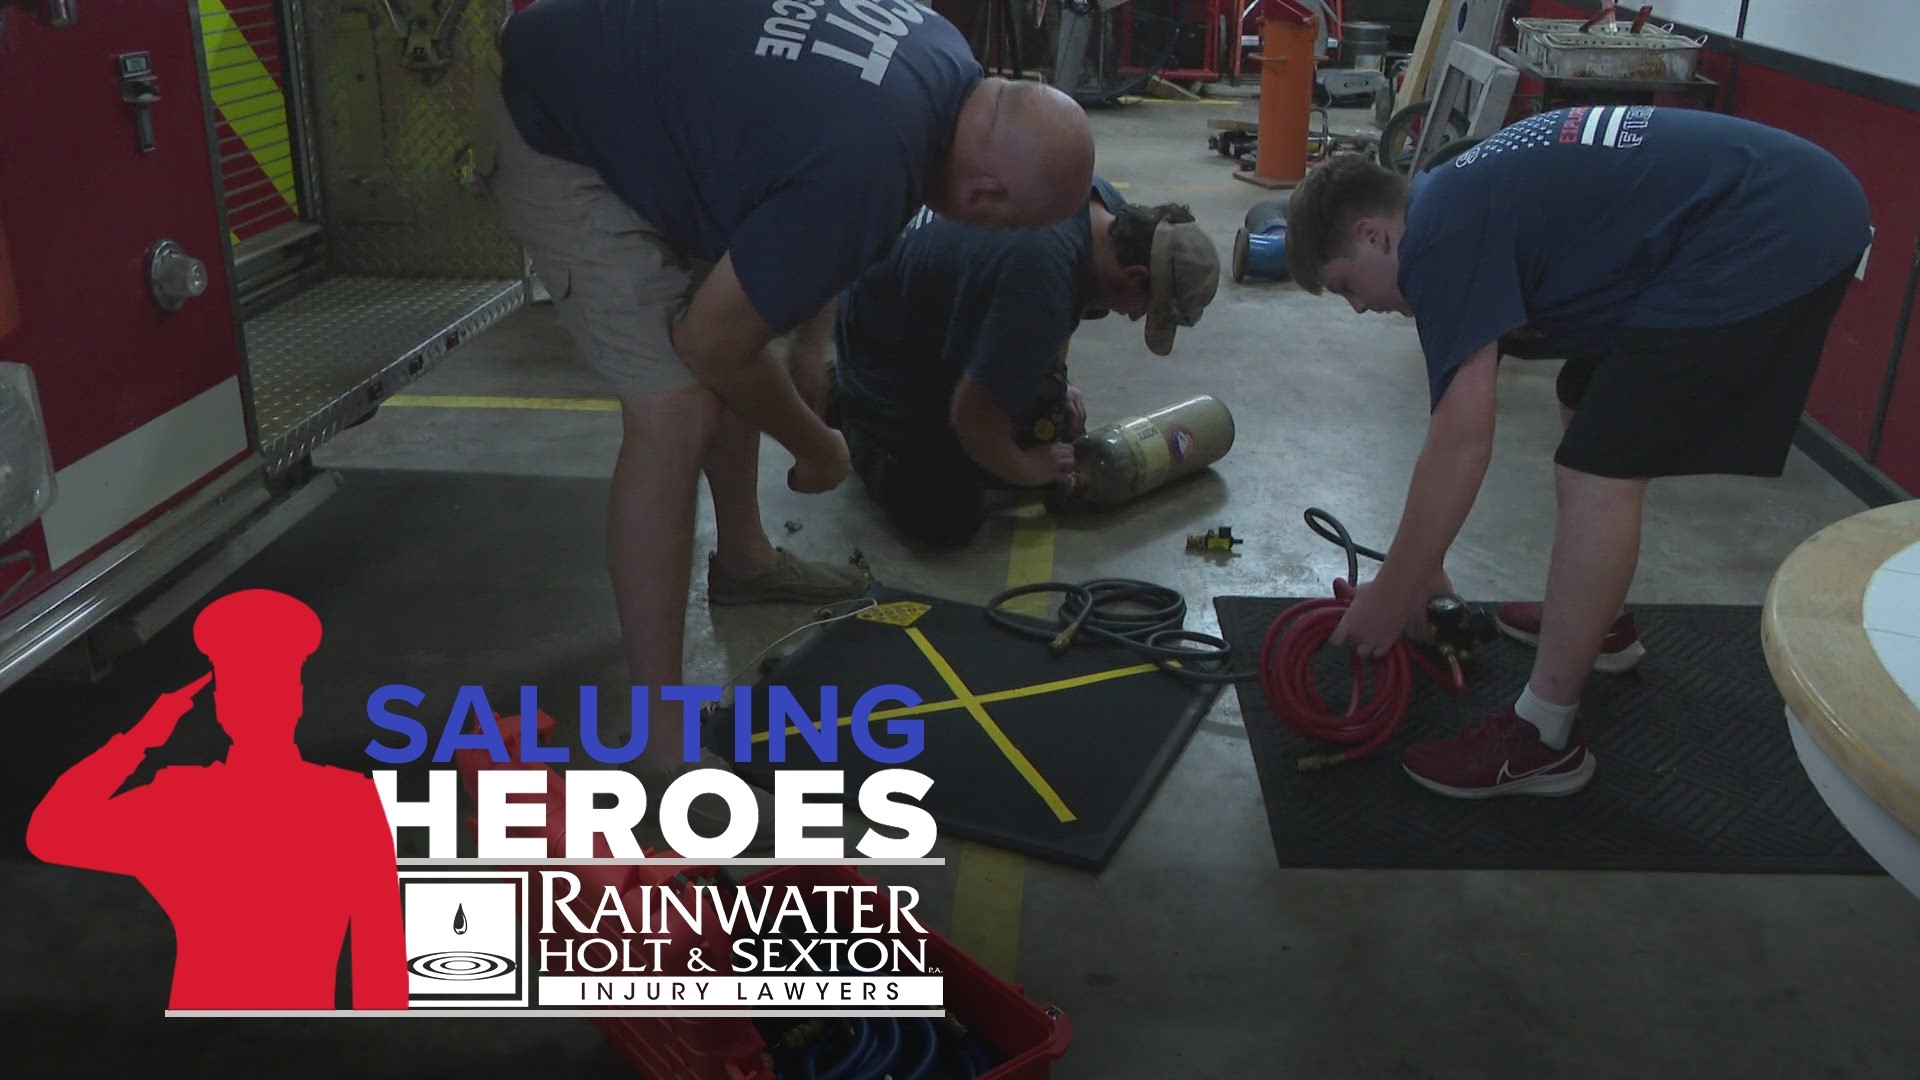 We’re saluting the heroes who are taking advantage of a Scouting program designed to get teenagers prepared for a career.